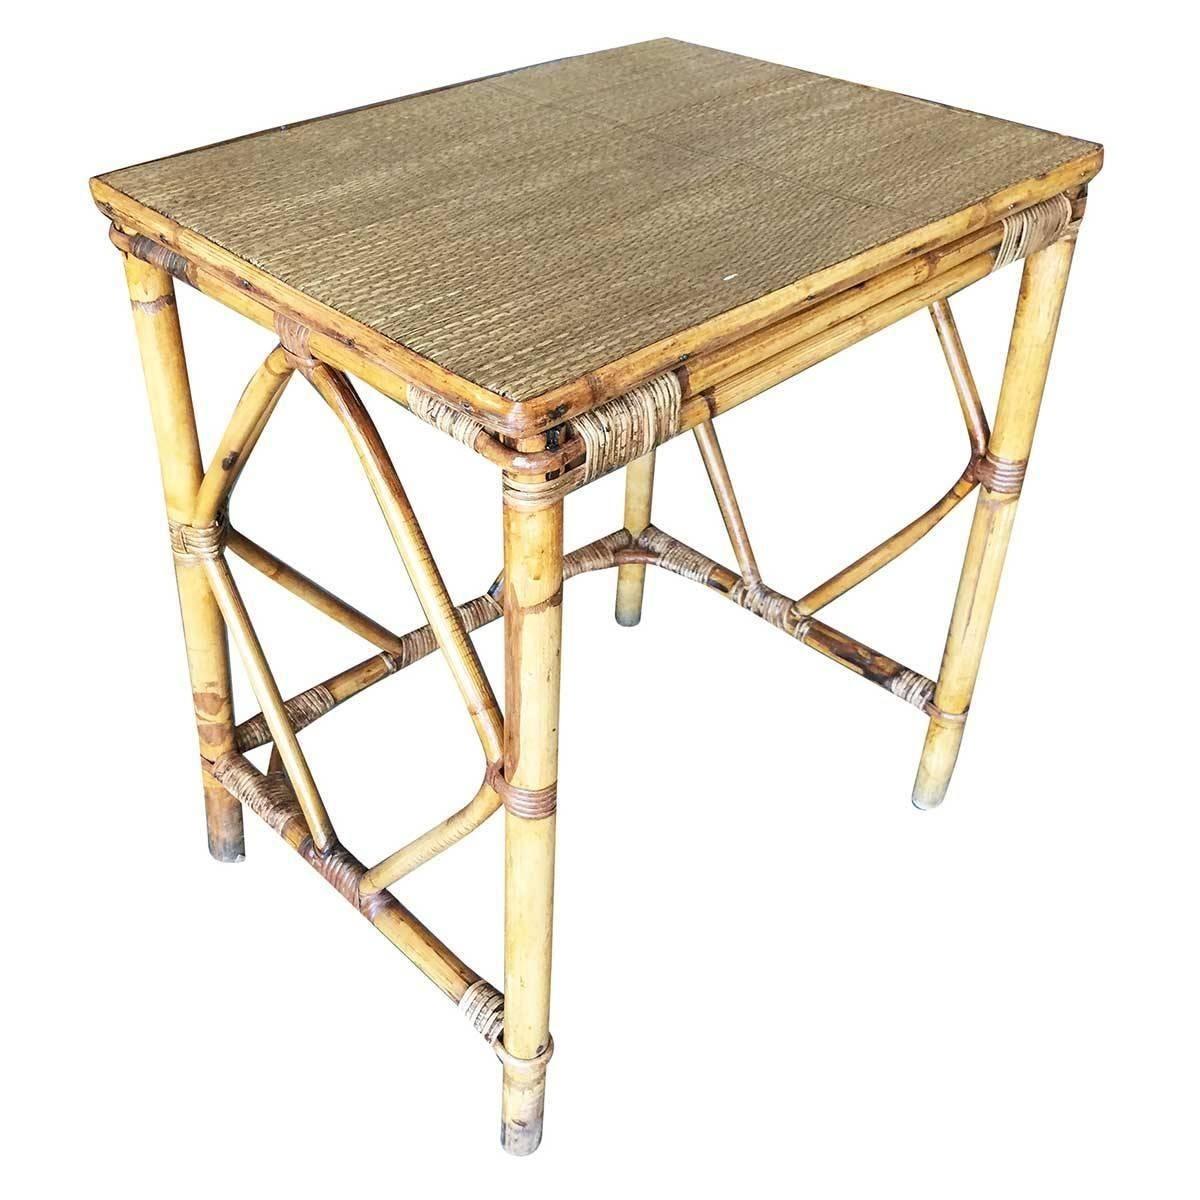 Simply yet elegant small rattan side table with steam-pressed diamond-shaped sides and rice mat top. The table features Classic wicker wrappings and Art Deco appeal.

1930, United States

We only purchase and sell only the best and finest rattan